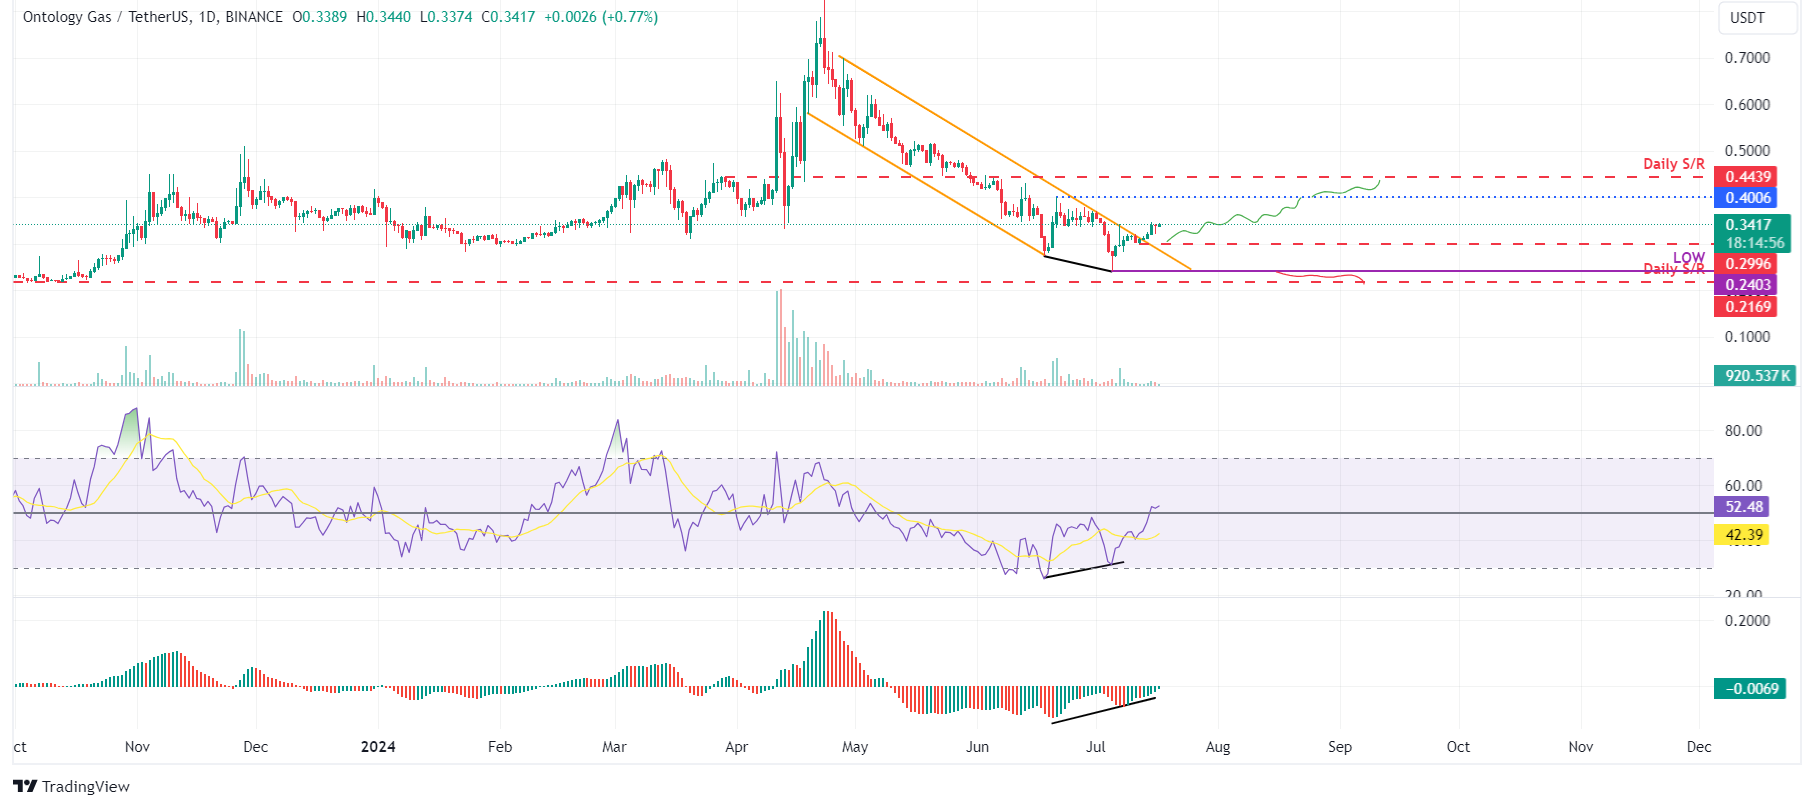 ONG/USDT daily chart